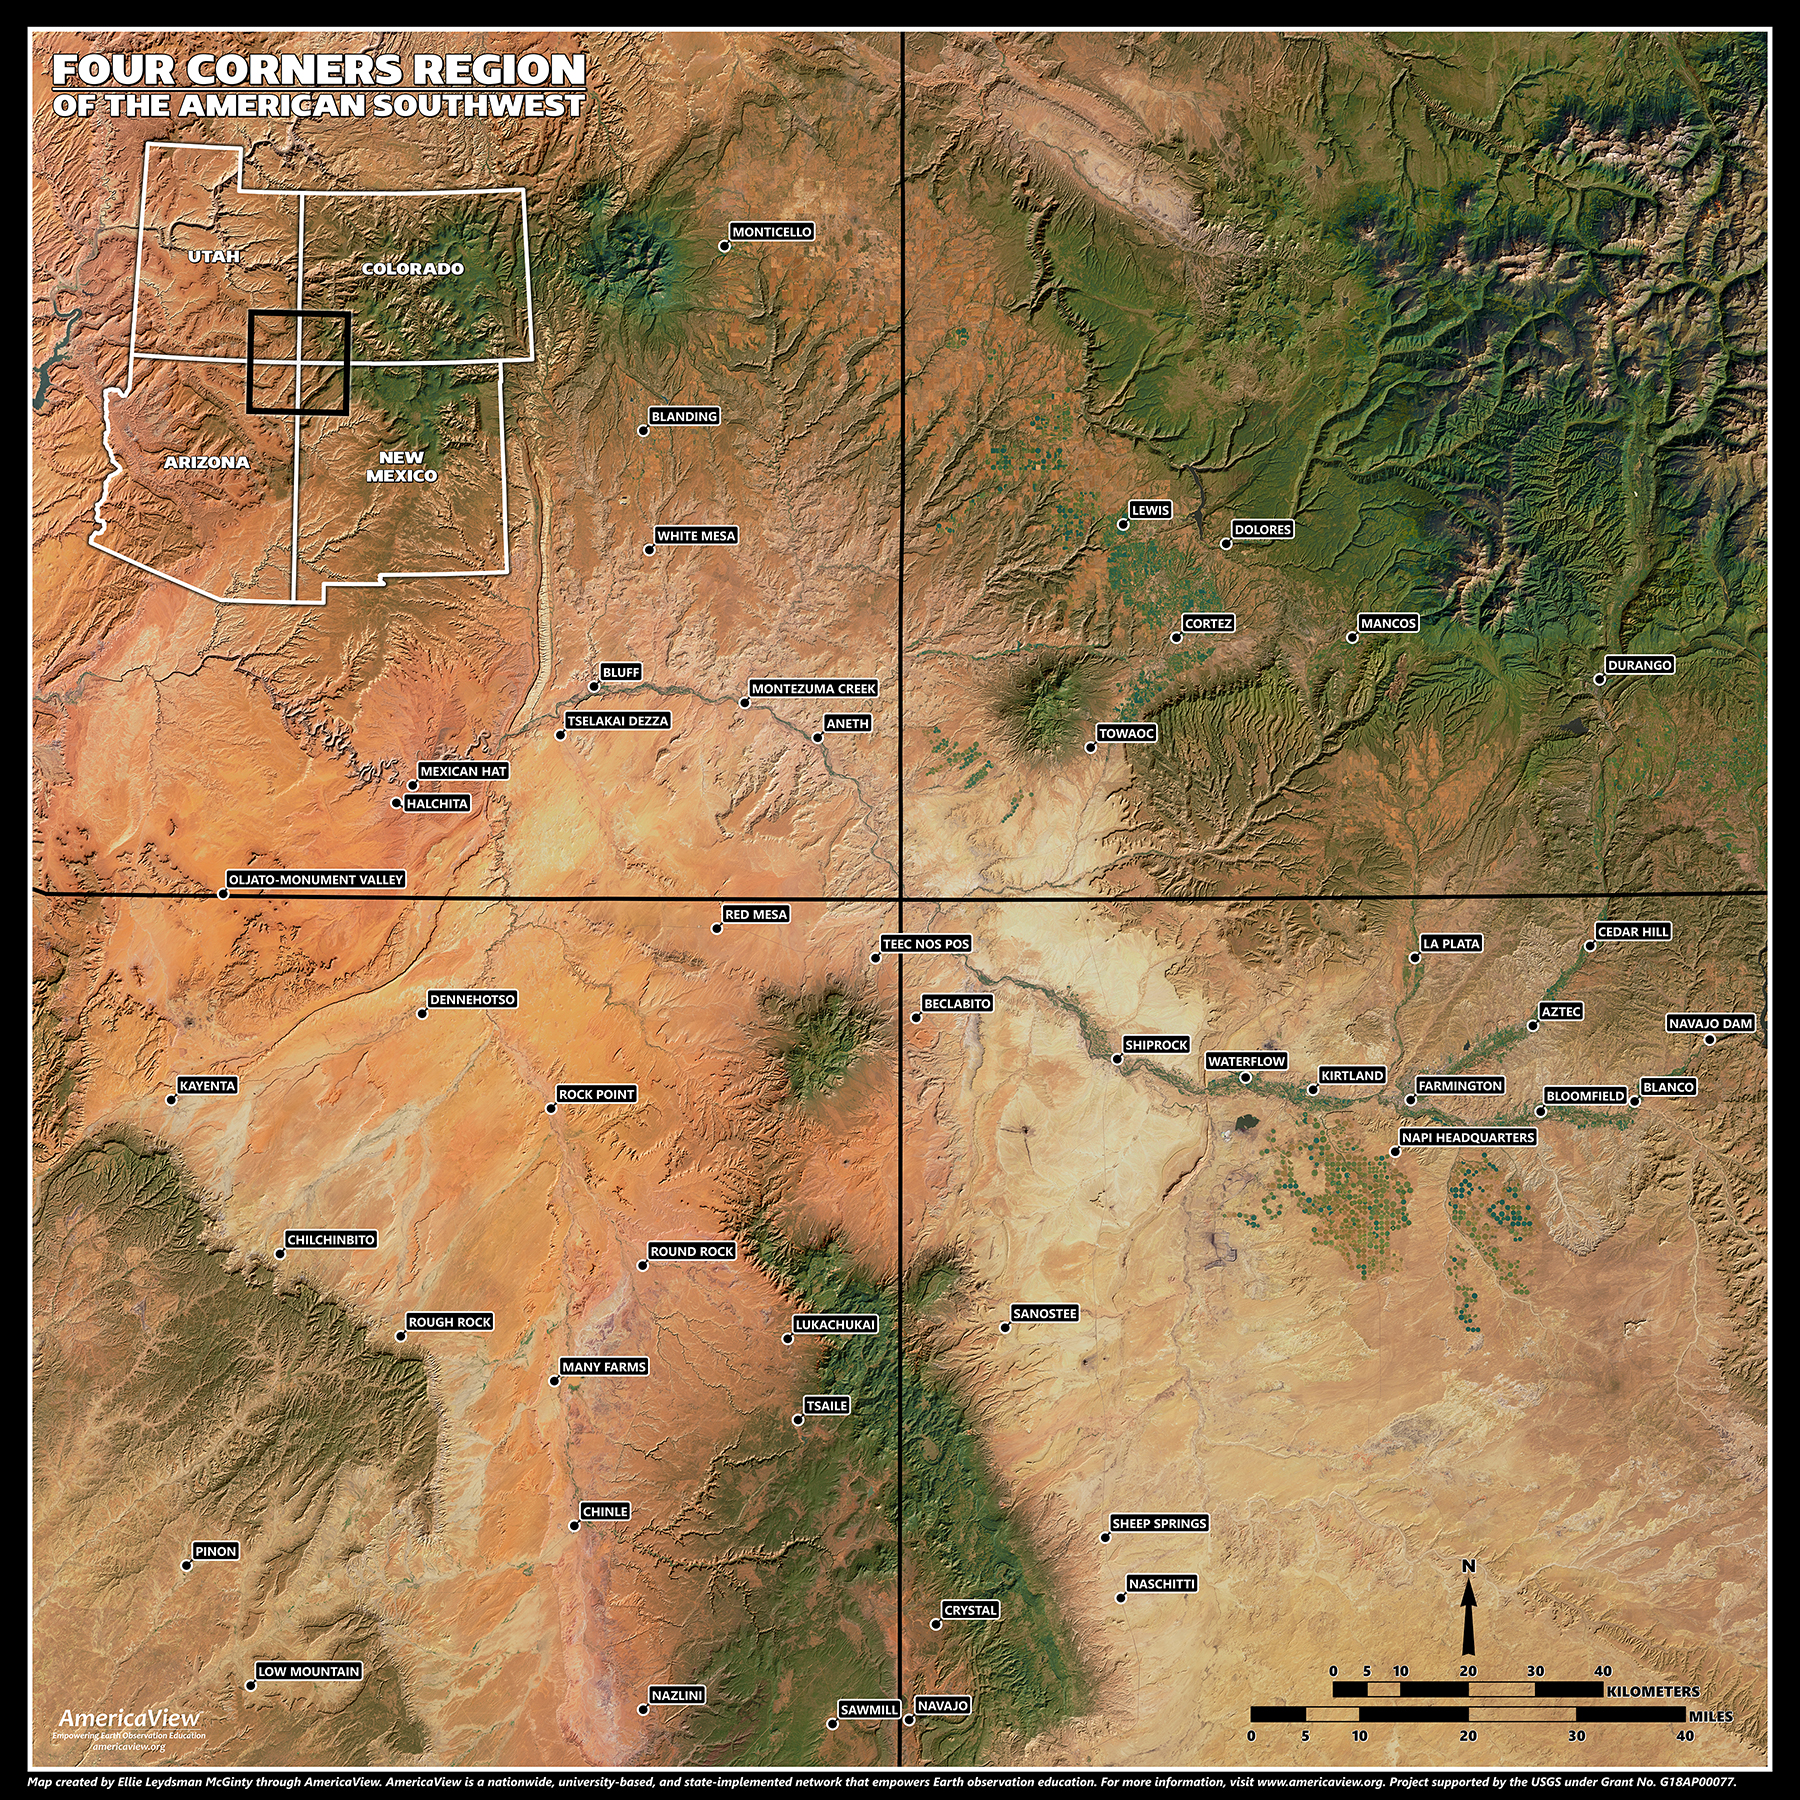 Landsat mosaic of the Four Corners region of the American Southwest.